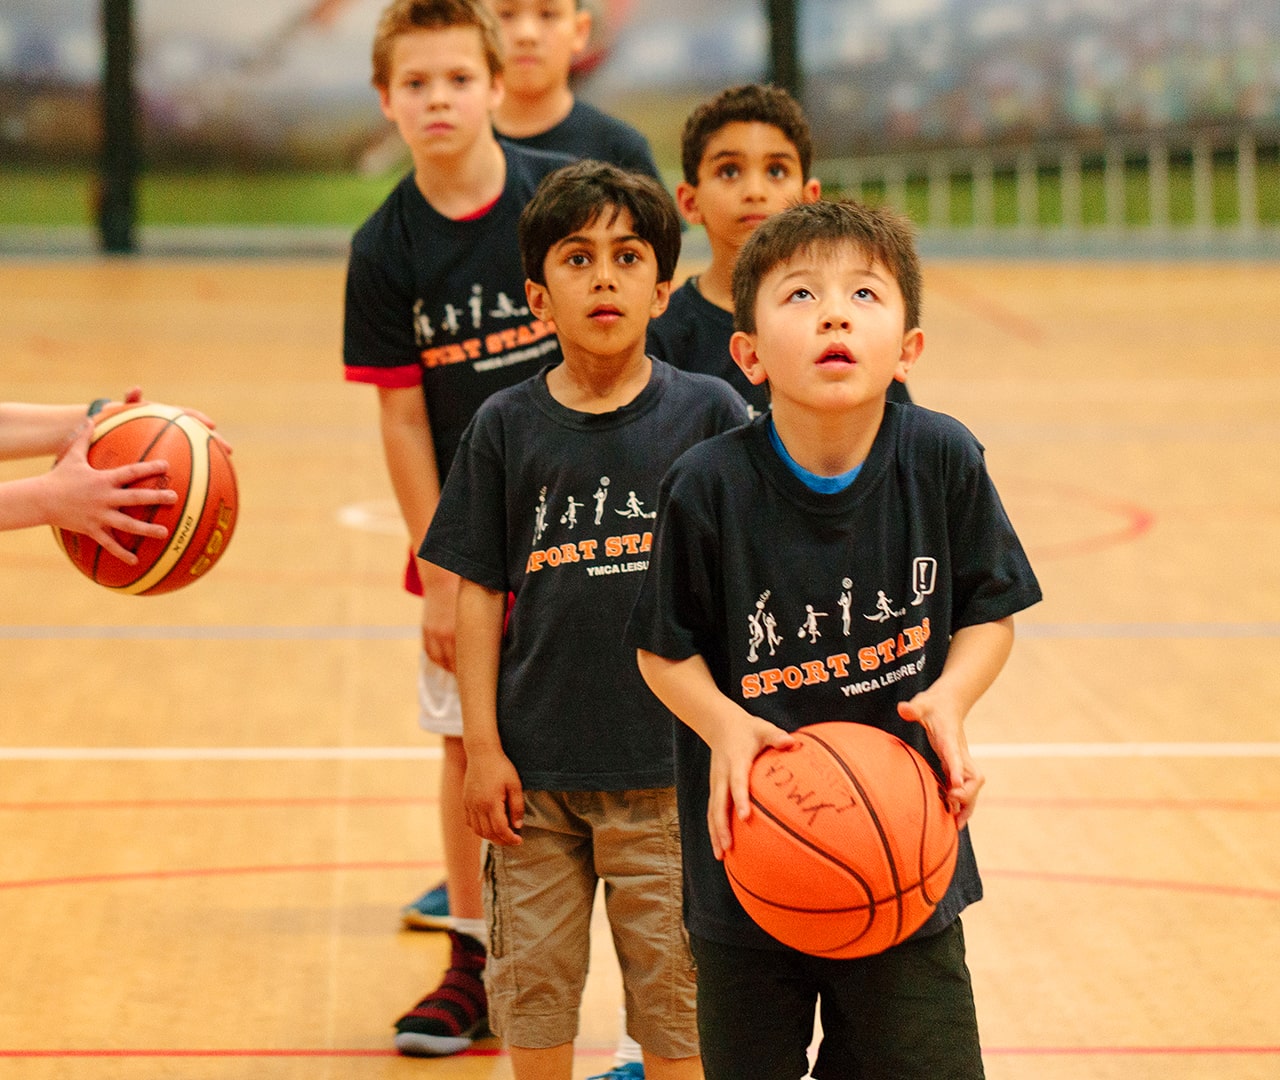 Young children focussed on basketball training